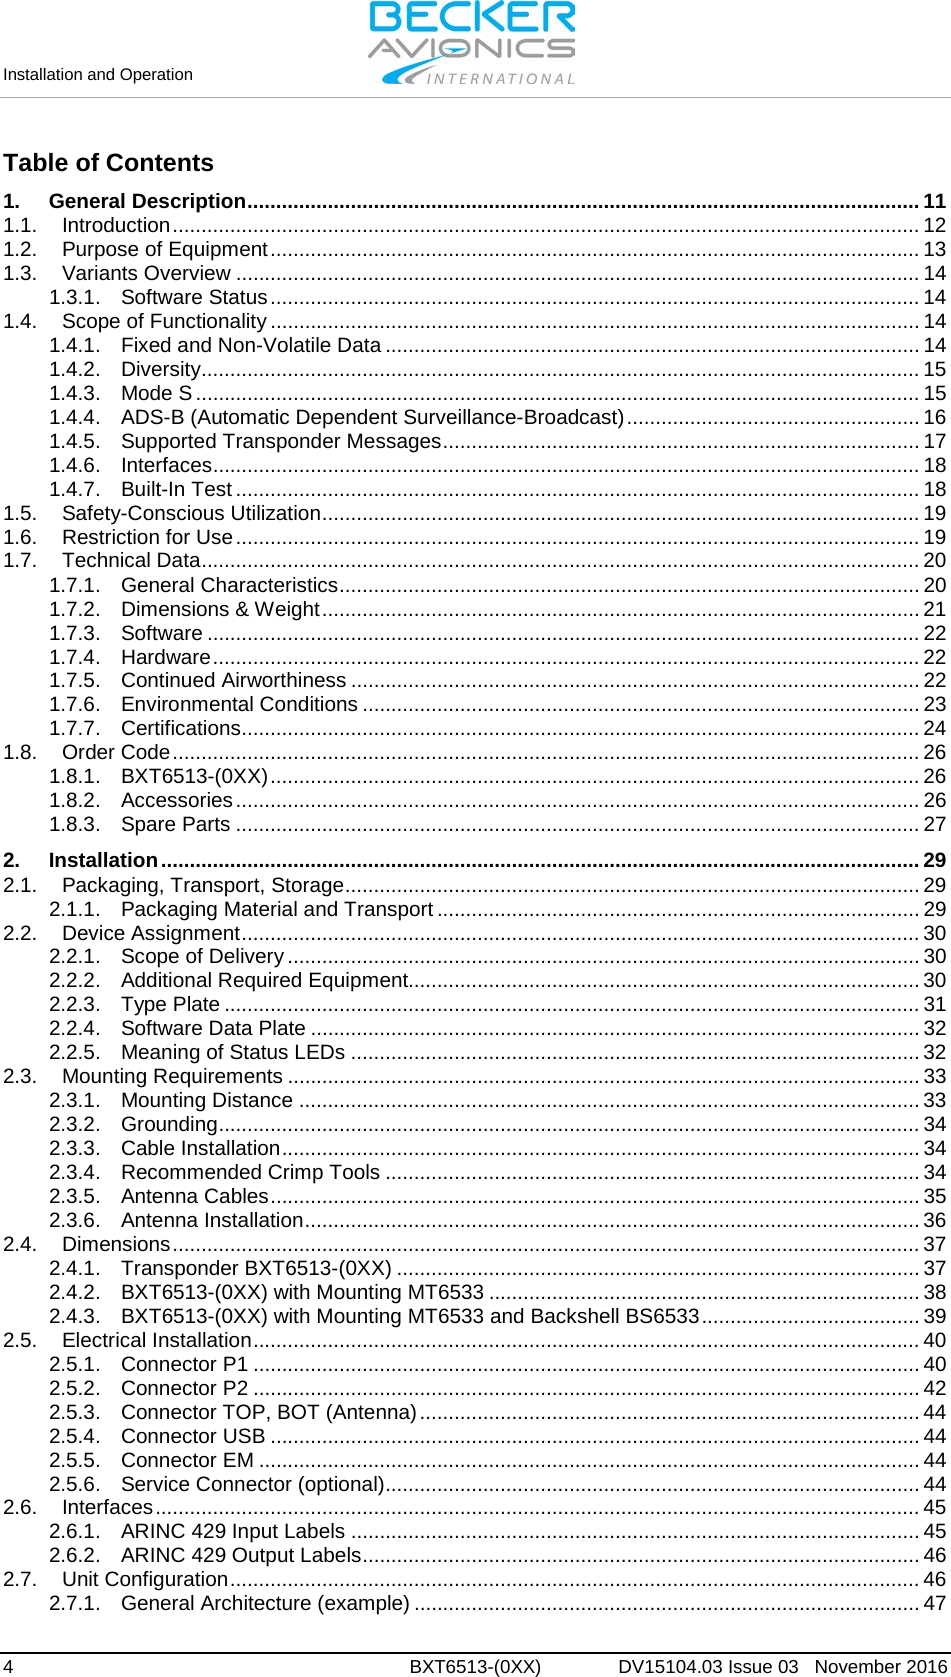 Installation and Operation     4  BXT6513-(0XX)  DV15104.03 Issue 03   November 2016 Table of Contents 1. General Description ..................................................................................................................... 11 1.1. Introduction .................................................................................................................................. 12 1.2. Purpose of Equipment ................................................................................................................. 13 1.3. Variants Overview ....................................................................................................................... 14 1.3.1. Software Status ................................................................................................................. 14 1.4. Scope of Functionality ................................................................................................................. 14 1.4.1. Fixed and Non-Volatile Data ............................................................................................. 14 1.4.2. Diversity ............................................................................................................................. 15 1.4.3. Mode S .............................................................................................................................. 15 1.4.4. ADS-B (Automatic Dependent Surveillance-Broadcast) ................................................... 16 1.4.5. Supported Transponder Messages ................................................................................... 17 1.4.6. Interfaces ........................................................................................................................... 18 1.4.7. Built-In Test ....................................................................................................................... 18 1.5. Safety-Conscious Utilization ........................................................................................................ 19 1.6. Restriction for Use ....................................................................................................................... 19 1.7. Technical Data ............................................................................................................................. 20 1.7.1. General Characteristics ..................................................................................................... 20 1.7.2. Dimensions &amp; Weight ........................................................................................................ 21 1.7.3. Software ............................................................................................................................ 22 1.7.4. Hardware ........................................................................................................................... 22 1.7.5. Continued Airworthiness ................................................................................................... 22 1.7.6. Environmental Conditions ................................................................................................. 23 1.7.7. Certifications...................................................................................................................... 24 1.8. Order Code .................................................................................................................................. 26 1.8.1. BXT6513-(0XX) ................................................................................................................. 26 1.8.2. Accessories ....................................................................................................................... 26 1.8.3. Spare Parts ....................................................................................................................... 27 2. Installation .................................................................................................................................... 29 2.1. Packaging, Transport, Storage .................................................................................................... 29 2.1.1. Packaging Material and Transport .................................................................................... 29 2.2. Device Assignment ...................................................................................................................... 30 2.2.1. Scope of Delivery .............................................................................................................. 30 2.2.2. Additional Required Equipment......................................................................................... 30 2.2.3. Type Plate ......................................................................................................................... 31 2.2.4. Software Data Plate .......................................................................................................... 32 2.2.5. Meaning of Status LEDs ................................................................................................... 32 2.3. Mounting Requirements .............................................................................................................. 33 2.3.1. Mounting Distance ............................................................................................................ 33 2.3.2. Grounding .......................................................................................................................... 34 2.3.3. Cable Installation ............................................................................................................... 34 2.3.4. Recommended Crimp Tools ............................................................................................. 34 2.3.5. Antenna Cables ................................................................................................................. 35 2.3.6. Antenna Installation ........................................................................................................... 36 2.4. Dimensions .................................................................................................................................. 37 2.4.1. Transponder BXT6513-(0XX) ........................................................................................... 37 2.4.2. BXT6513-(0XX) with Mounting MT6533 ........................................................................... 38 2.4.3. BXT6513-(0XX) with Mounting MT6533 and Backshell BS6533 ...................................... 39 2.5. Electrical Installation .................................................................................................................... 40 2.5.1. Connector P1 .................................................................................................................... 40 2.5.2. Connector P2 .................................................................................................................... 42 2.5.3. Connector TOP, BOT (Antenna) ....................................................................................... 44 2.5.4. Connector USB ................................................................................................................. 44 2.5.5. Connector EM ................................................................................................................... 44 2.5.6. Service Connector (optional) ............................................................................................. 44 2.6. Interfaces ..................................................................................................................................... 45 2.6.1. ARINC 429 Input Labels ................................................................................................... 45 2.6.2. ARINC 429 Output Labels ................................................................................................. 46 2.7. Unit Configuration ........................................................................................................................ 46 2.7.1. General Architecture (example) ........................................................................................ 47 